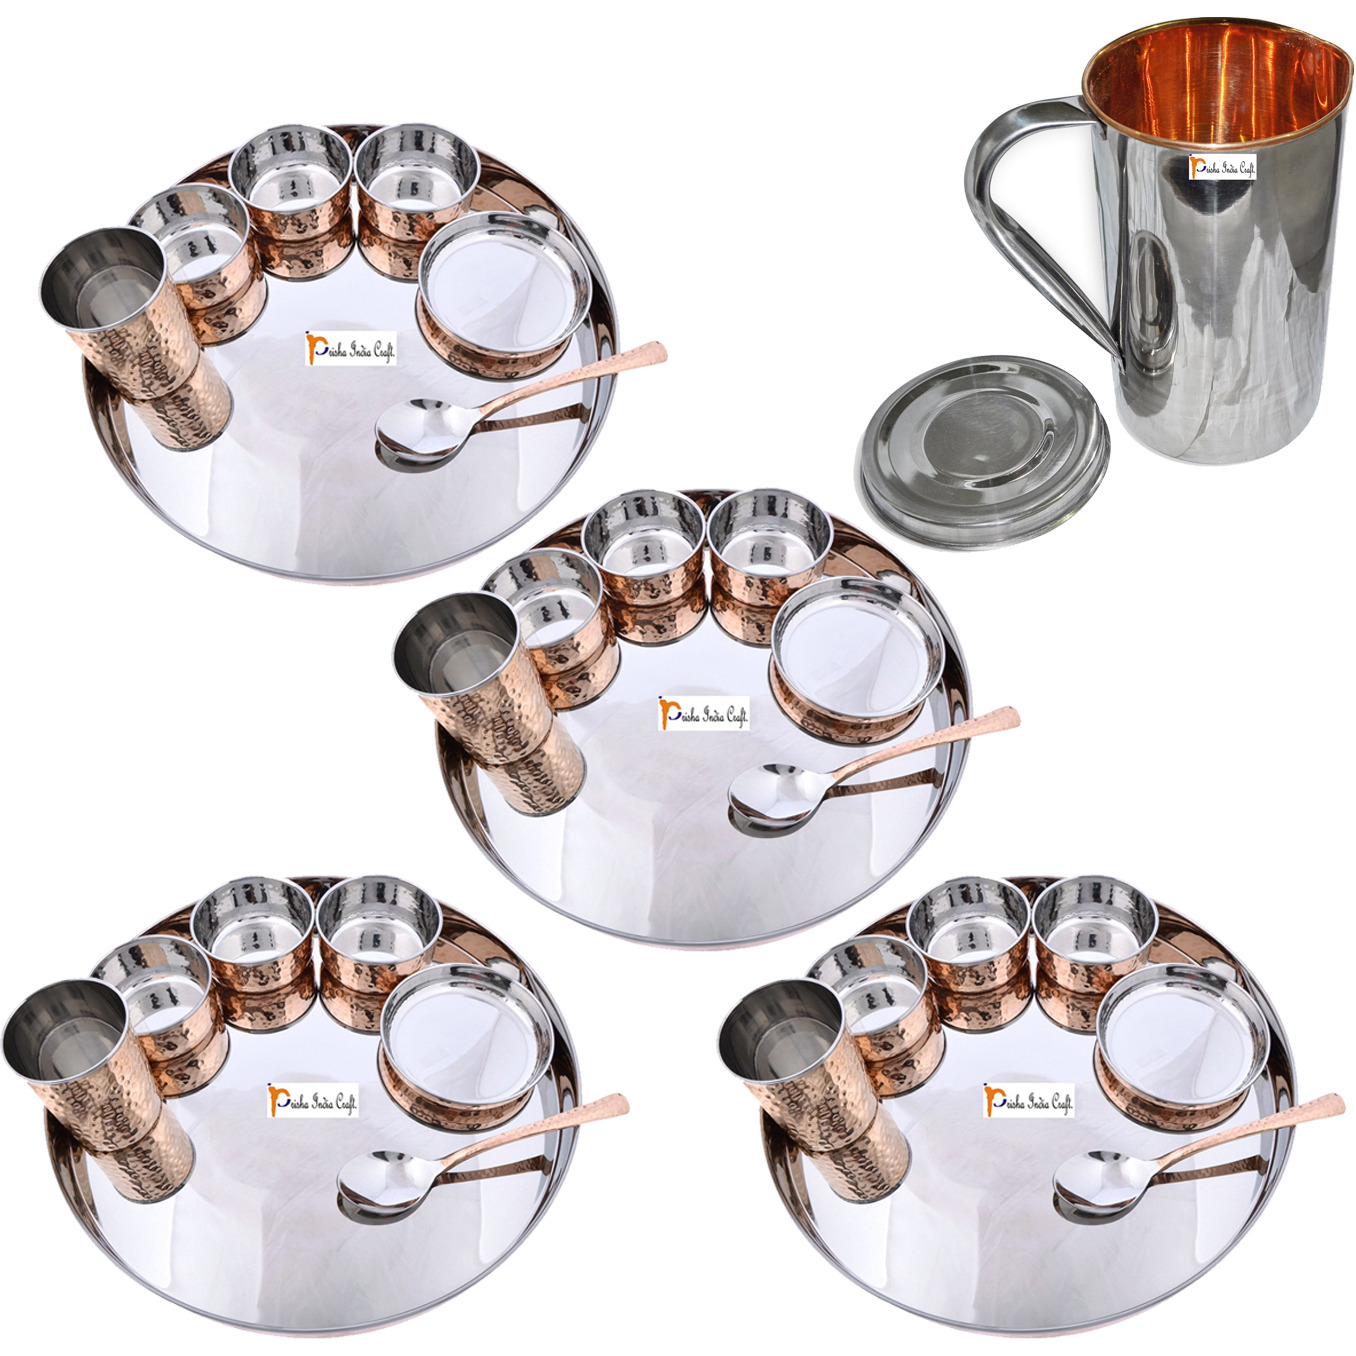 Prisha India Craft B. Set of 4 Dinnerware Traditional Stainless Steel Copper Dinner Set of Thali Plate, Bowls, Glass and Spoon, Dia 13  With 1 Stainless Steel Copper Pitcher Jug - Christmas Gift